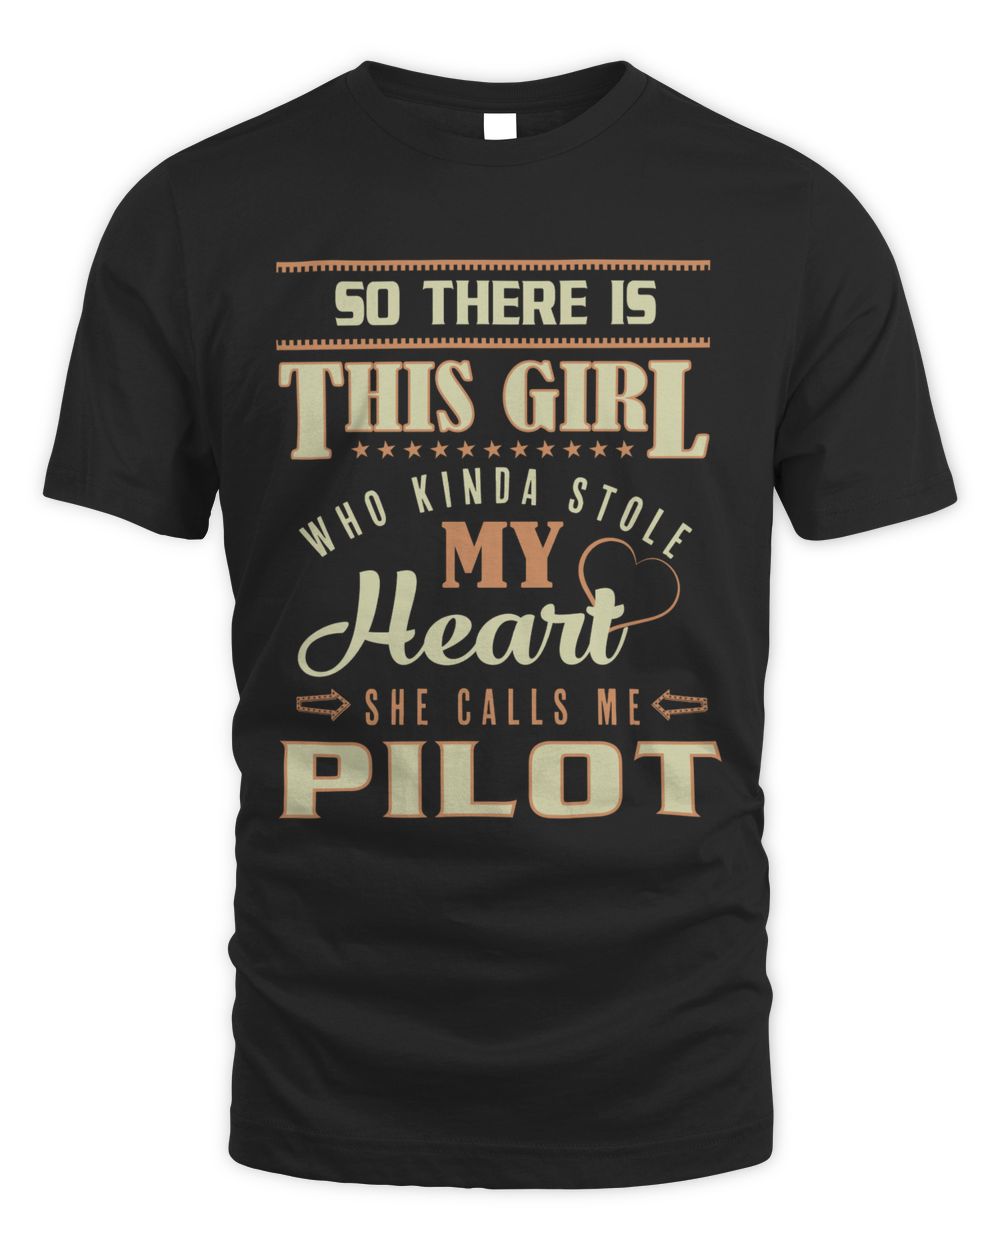 So there is this girl who kinda stole my heart she calls me pilot Unisex Standard T-Shirt black 